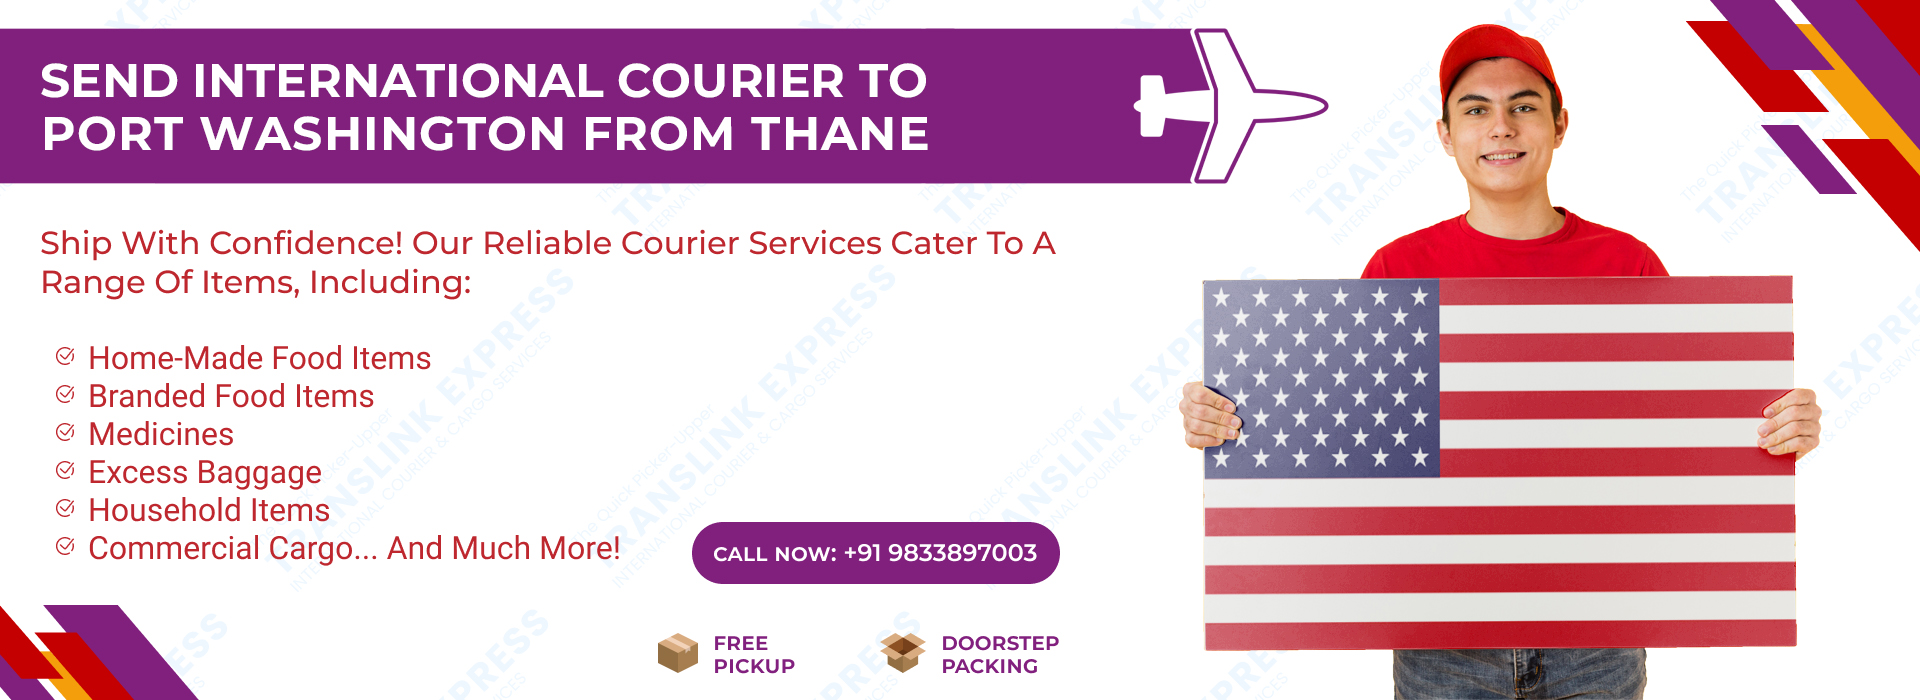 Courier to Port Washington From Thane